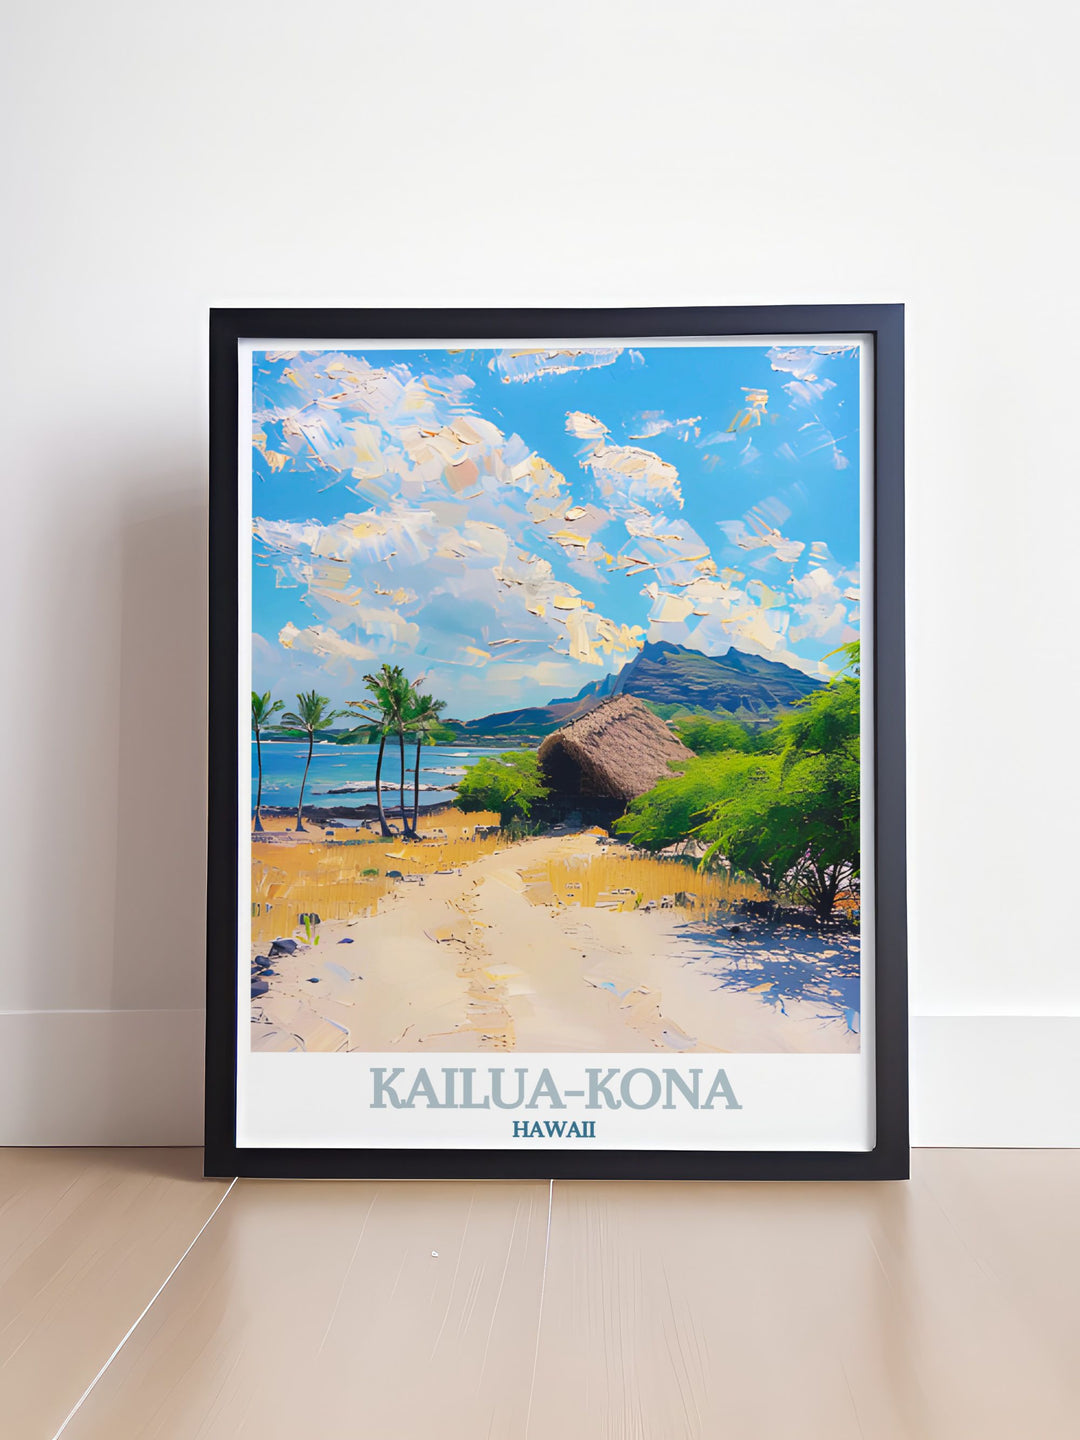 Detailed illustration of Kaloko Honokohau National Historical Park, highlighting its ancient fishponds and archaeological sites. The fine line art emphasizes the cultural significance and natural beauty of this Hawaiian landmark.